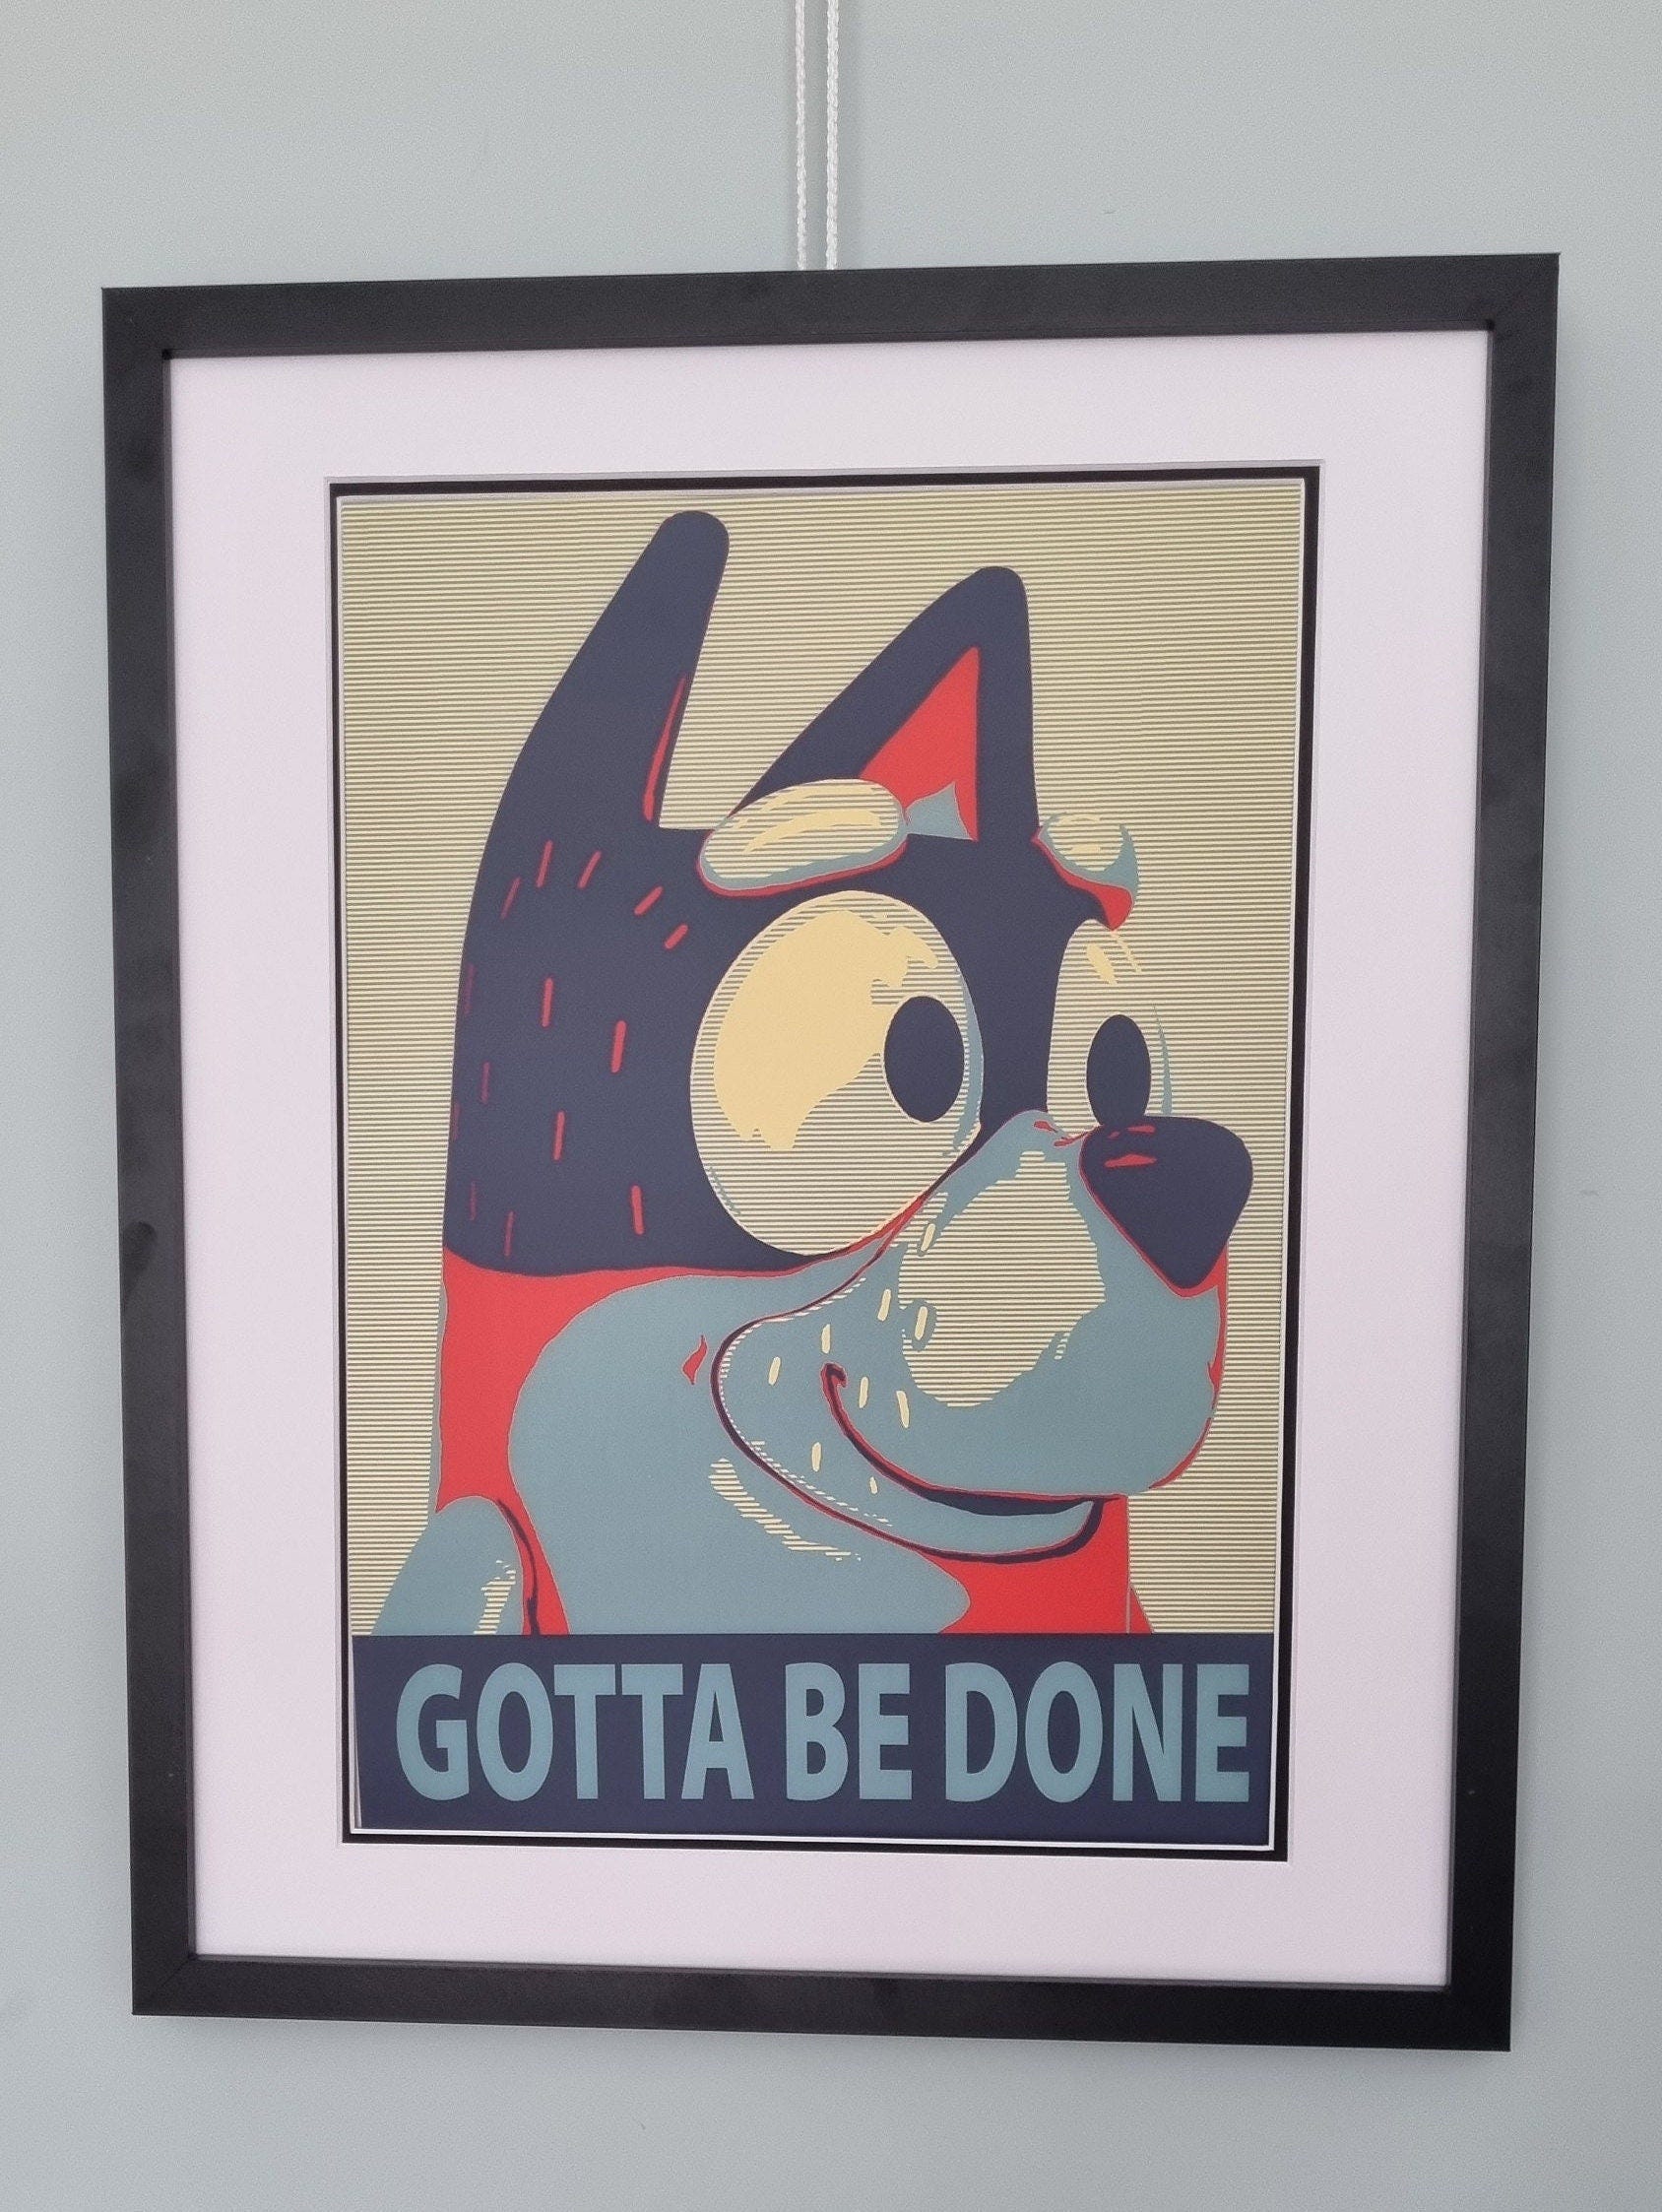 Bluey Themed Bandit A3 Poster - "Gotta Be Done"